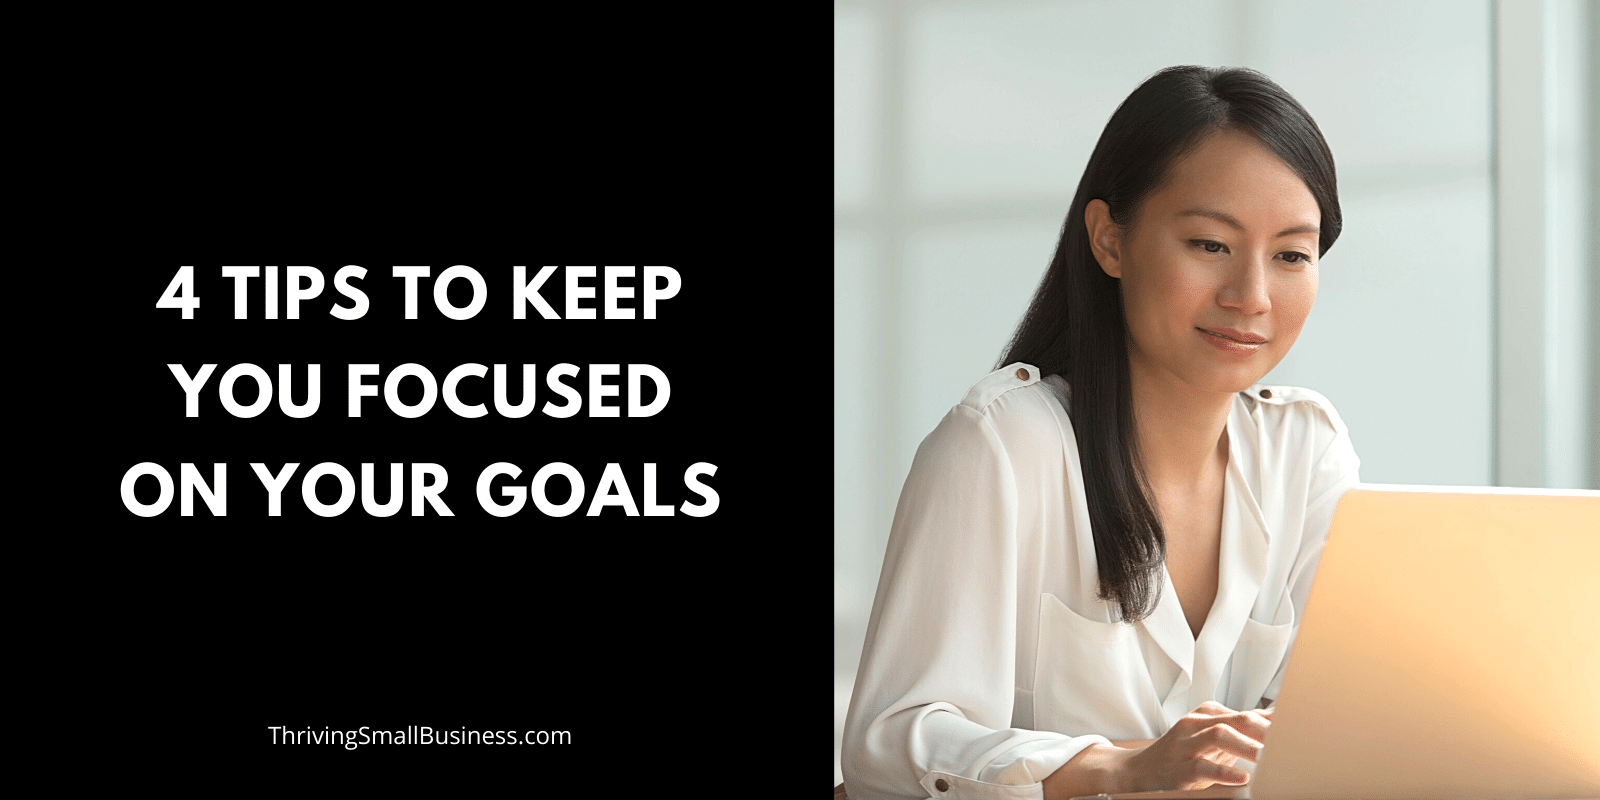 Tips to keep you focused on goals